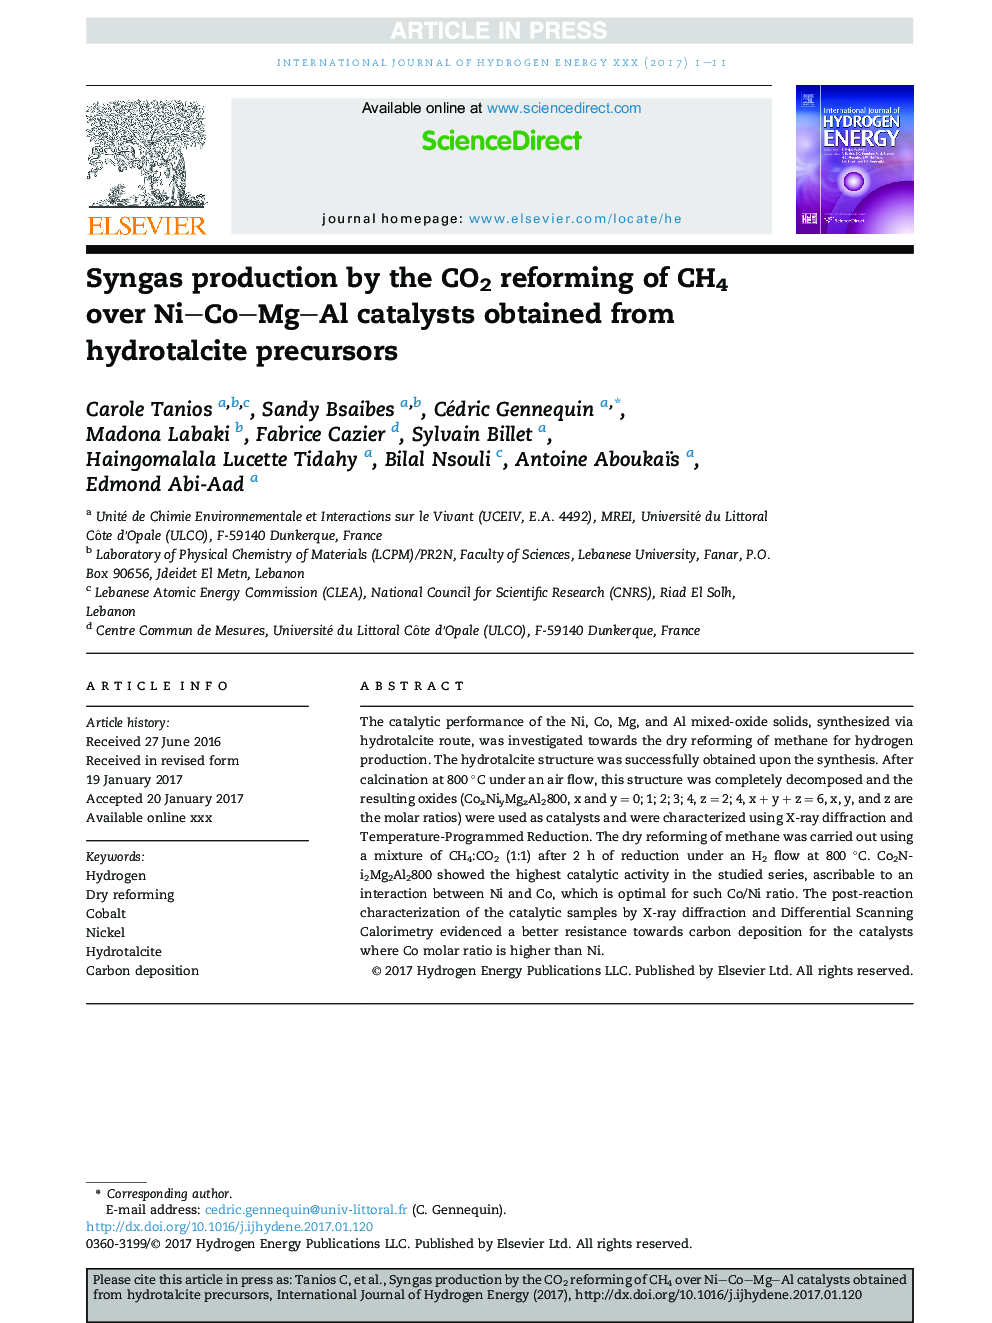 Syngas production by the CO2 reforming of CH4 over Ni-Co-Mg-Al catalysts obtained from hydrotalcite precursors